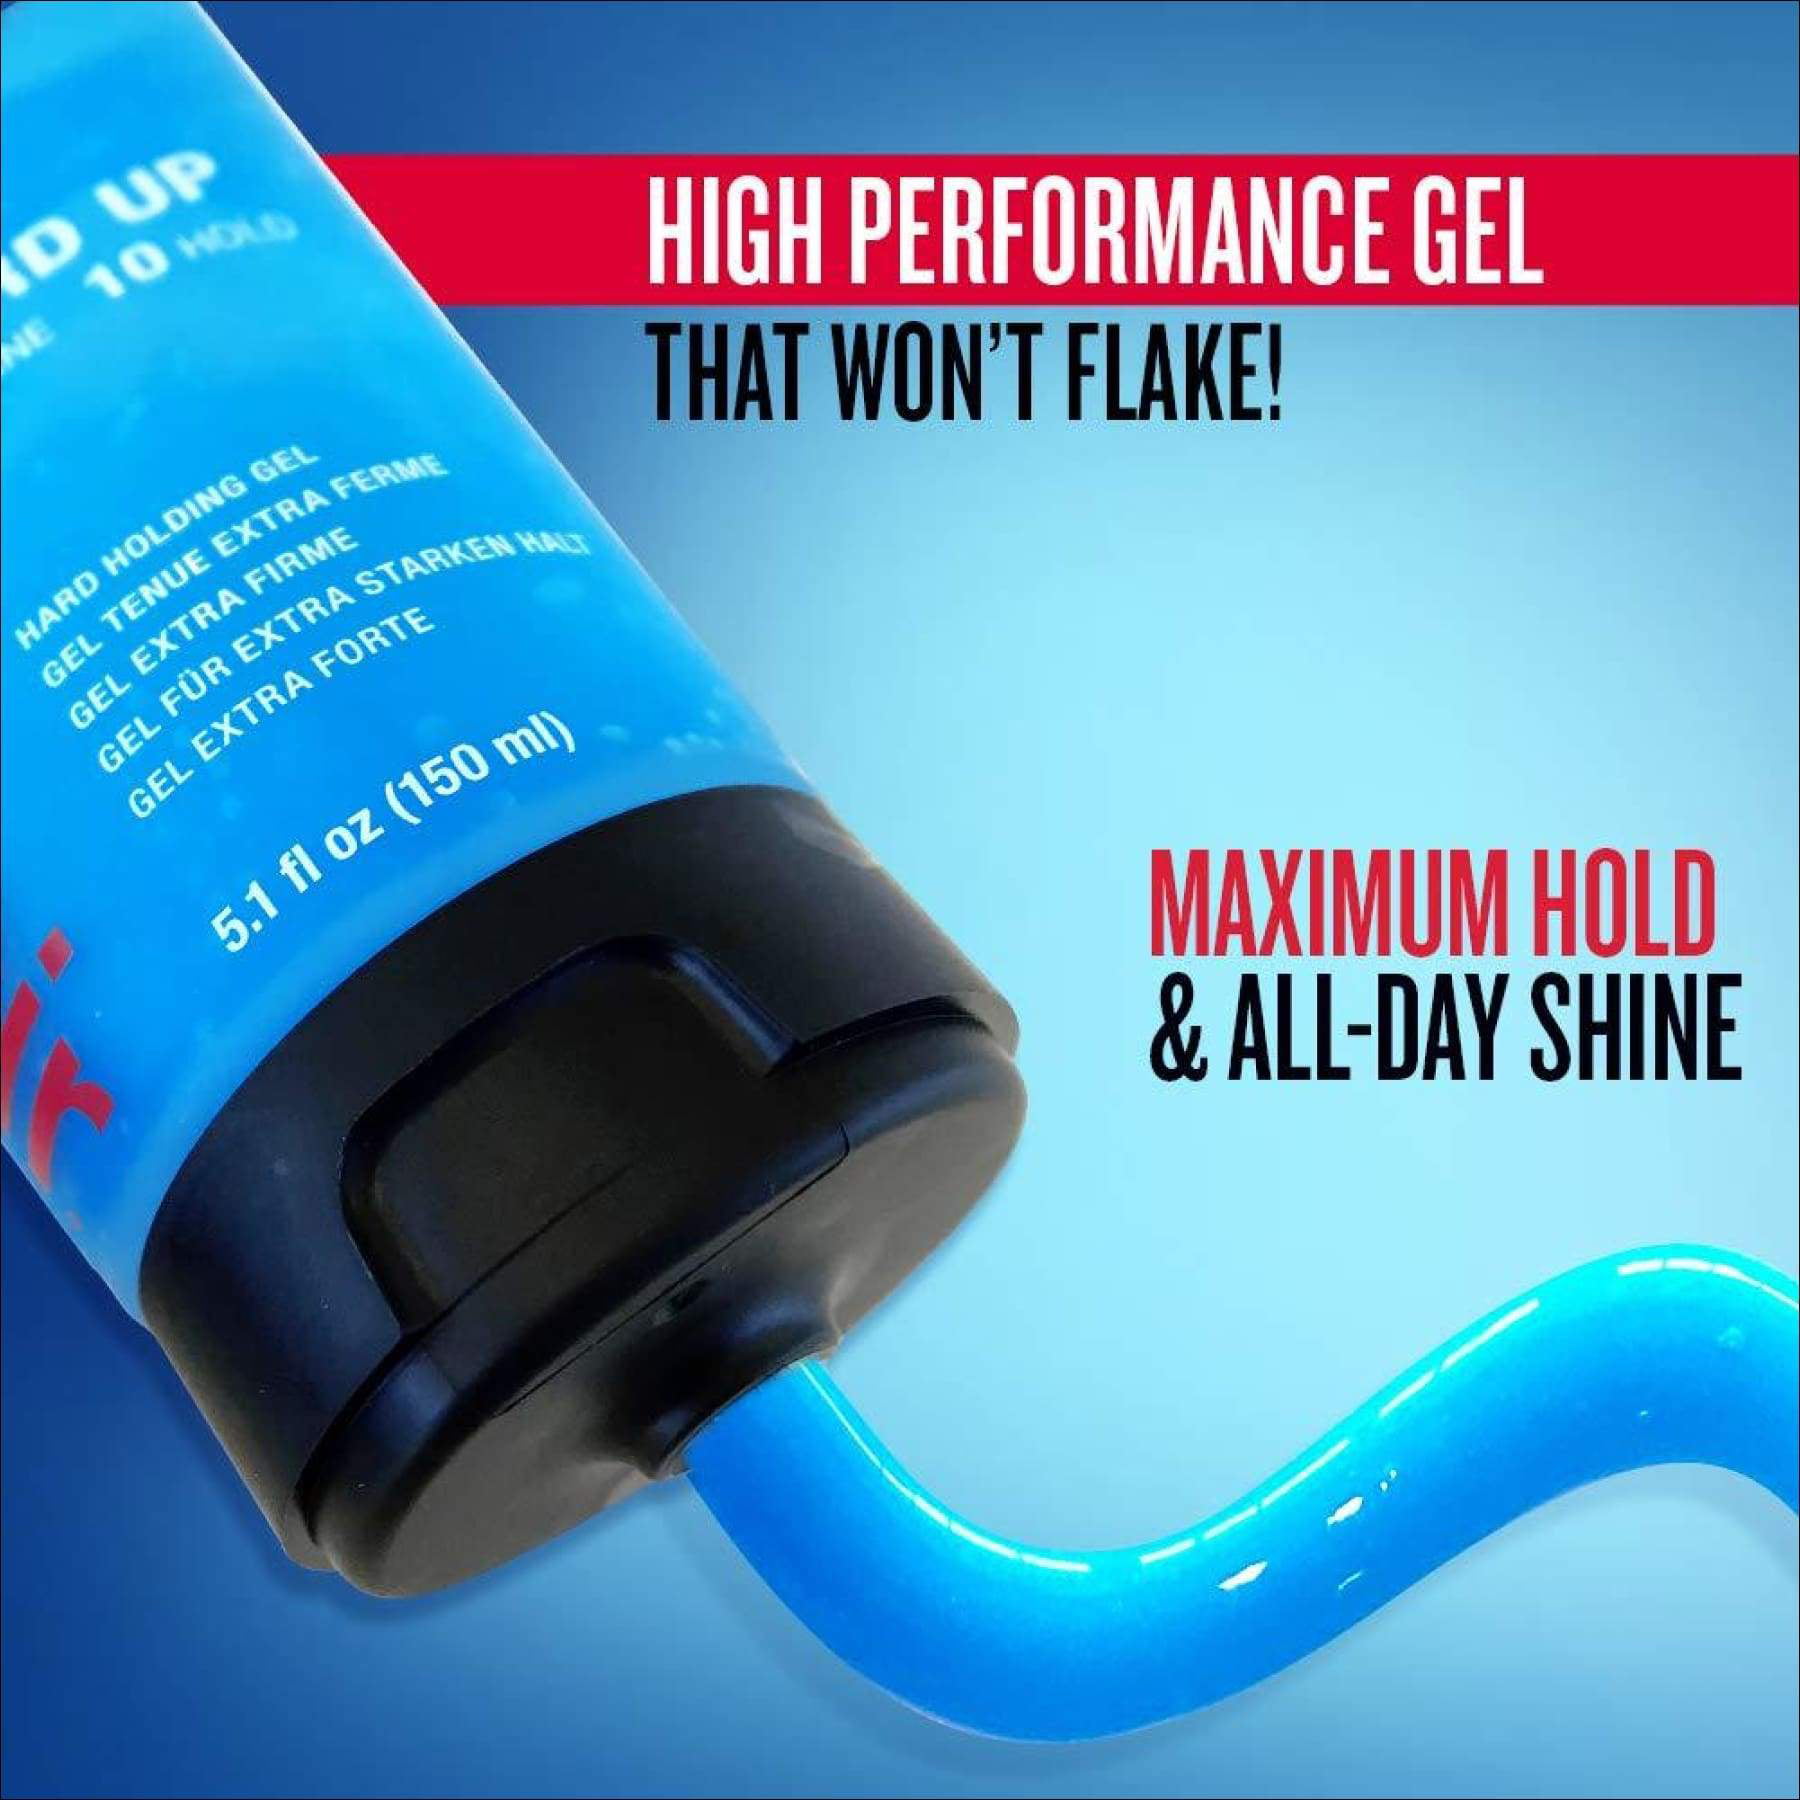 Travel Size Style Sexy Hair Hard Up Hard Holding Gel